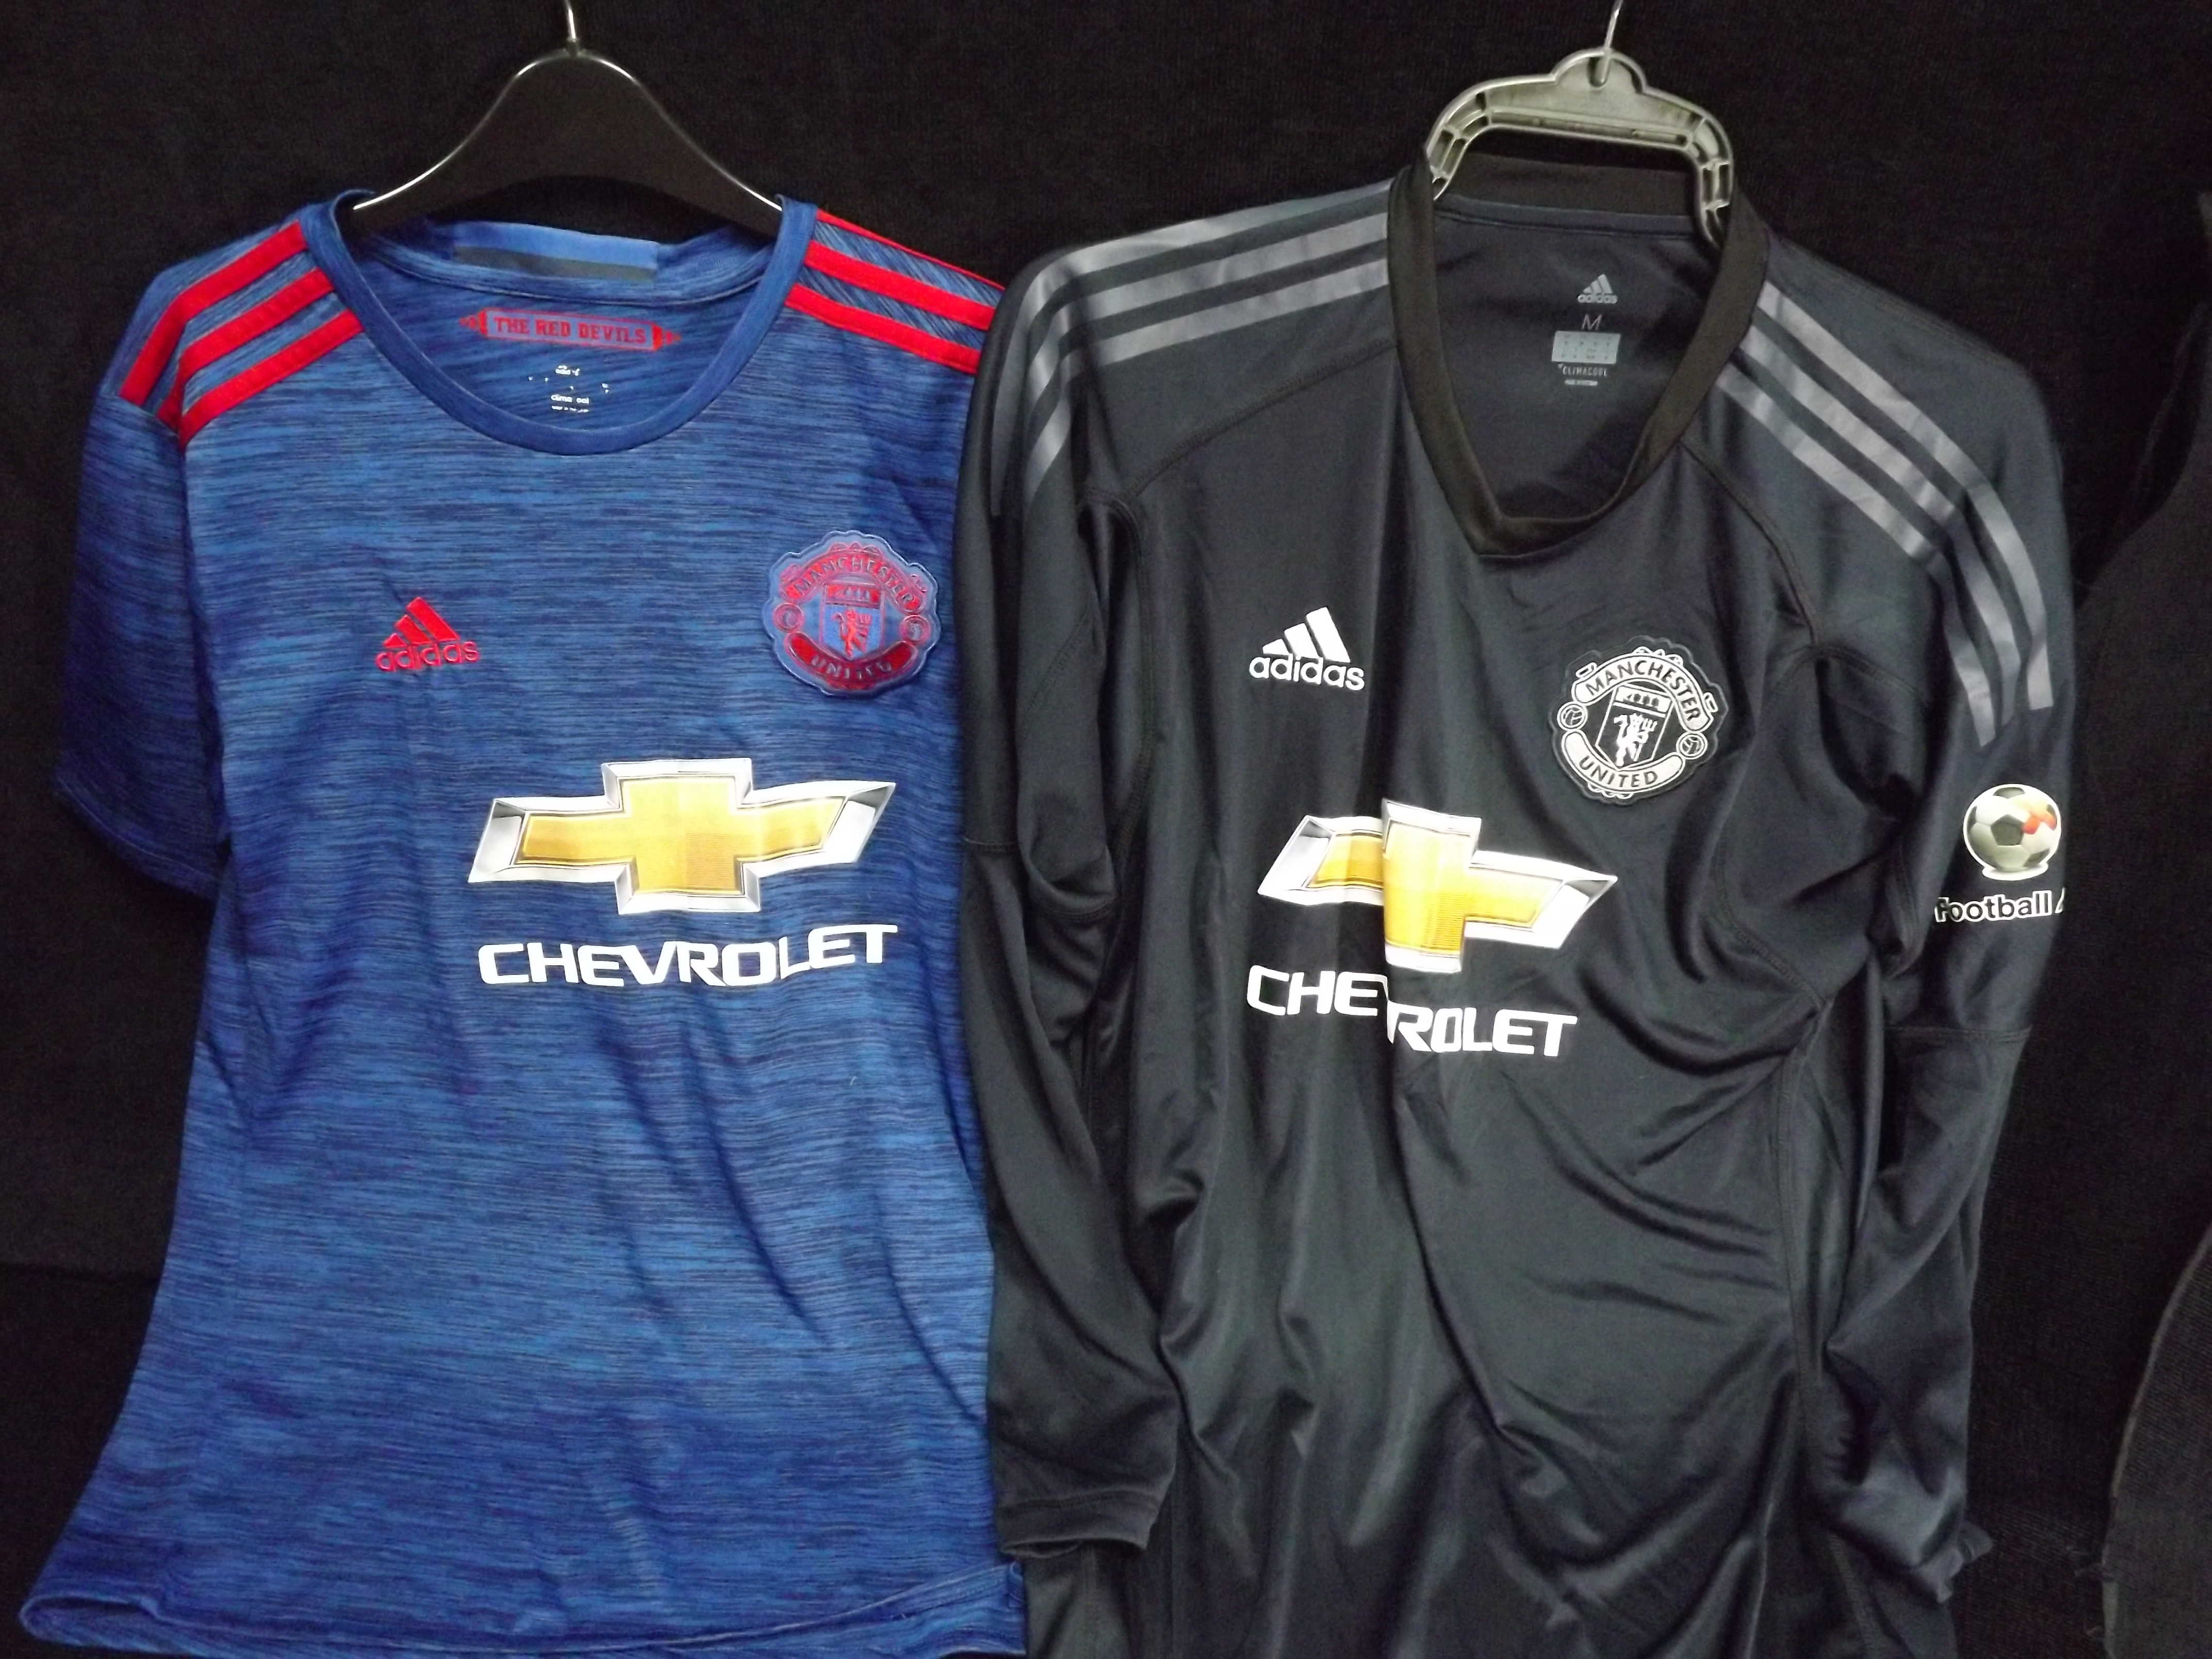 8 x Manchester United Football Shirts. Adidas Chevrolet. No.1 Home Goalkeeper Long Sleeve Shirt in - Image 8 of 9